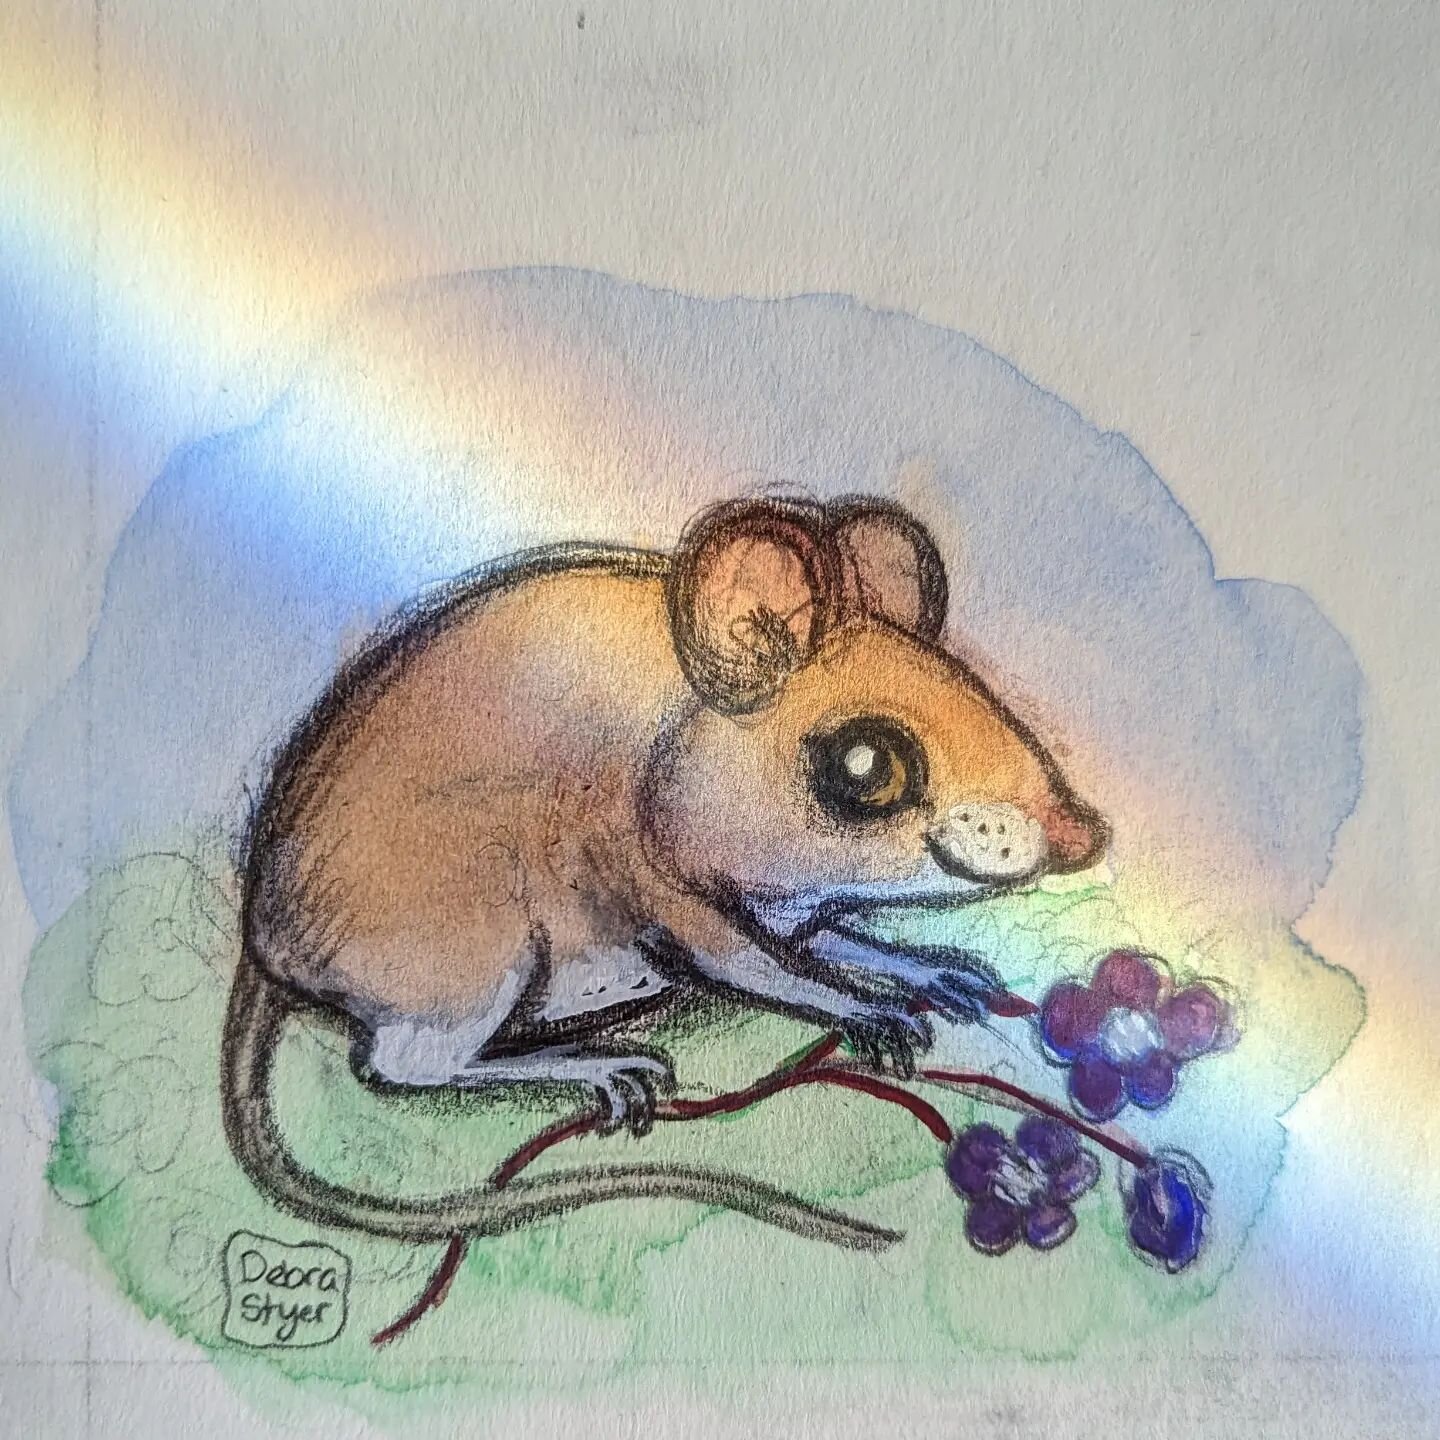 Today's warmup....a little mouse in a rainbow. #illustration #mouse #cutemouse #watercolor #animalillustration